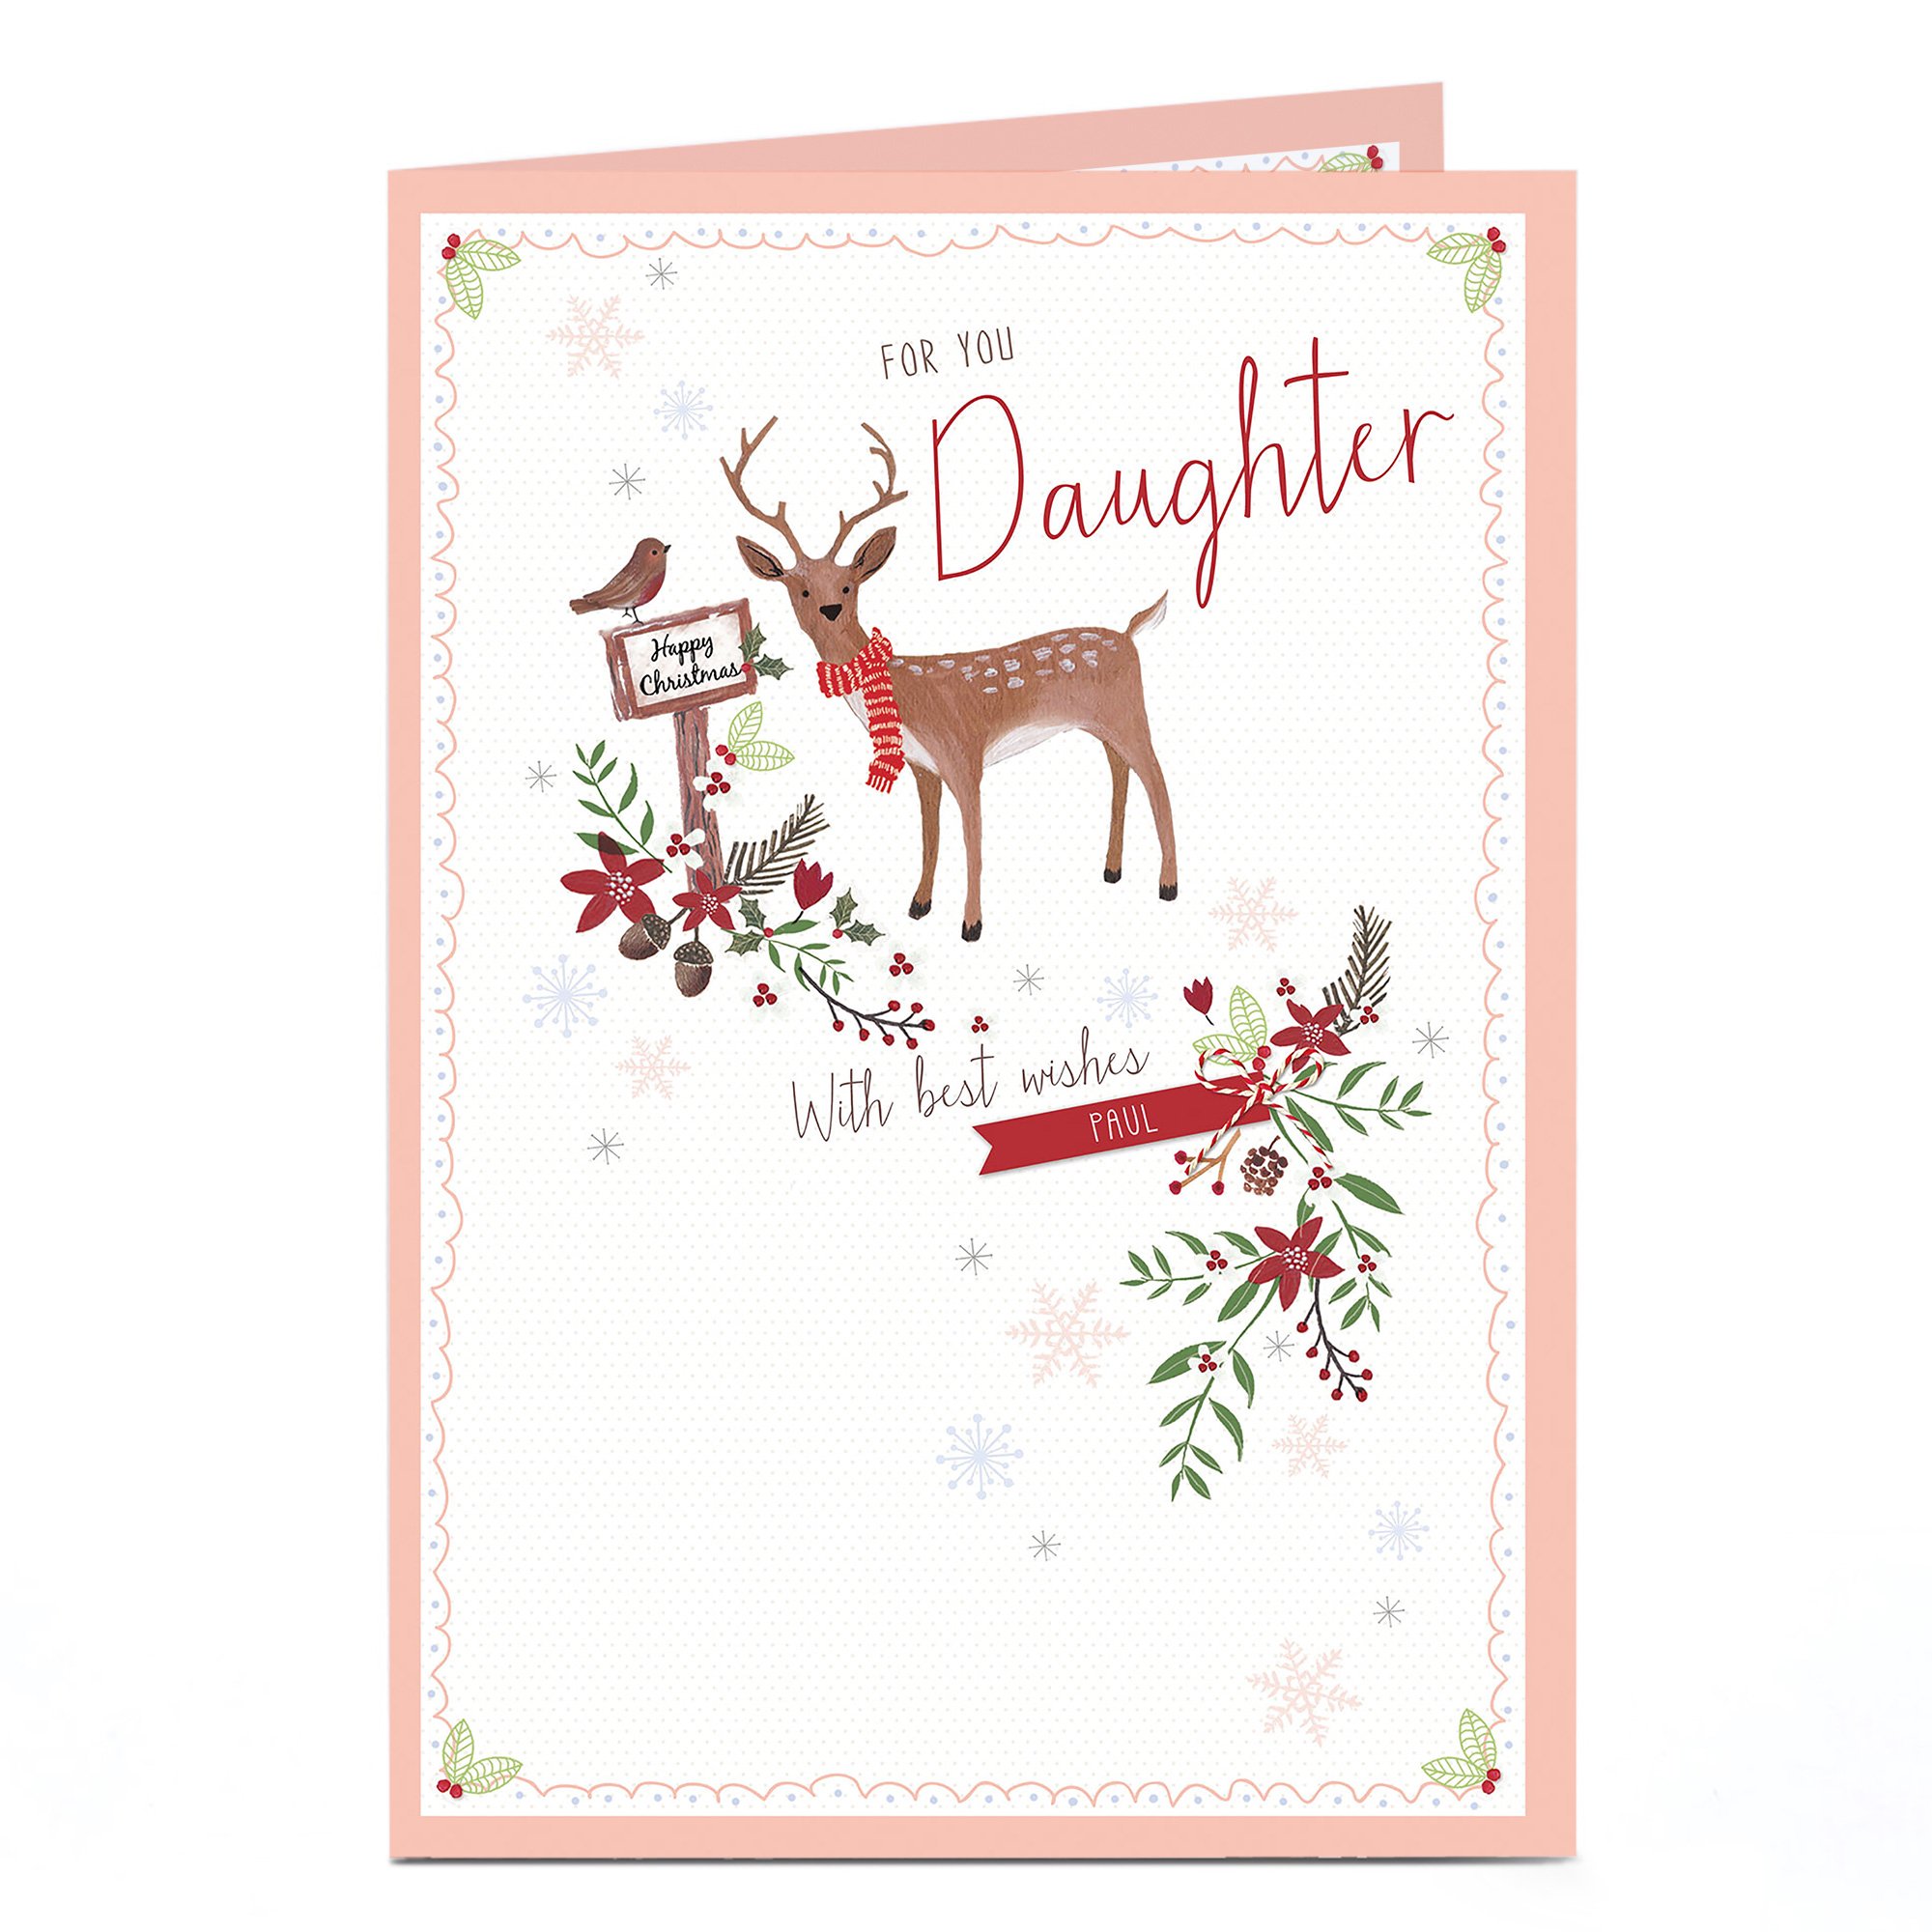 Personalised Christmas Card - For You Daughter